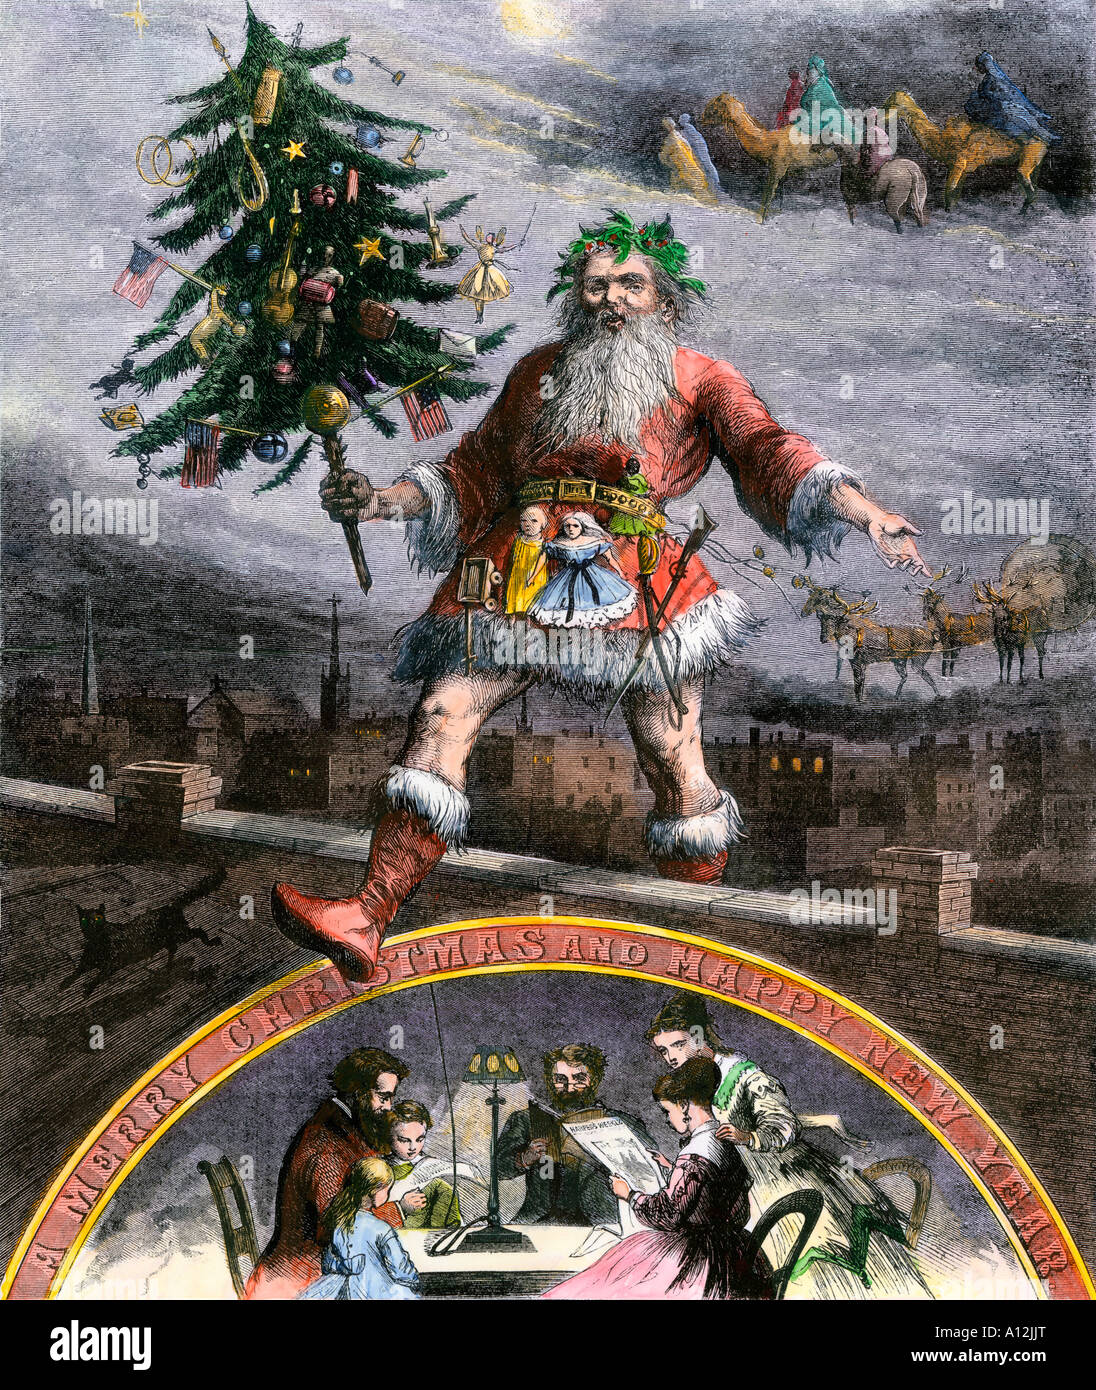 Santa Claus on a rooftop carrying a decorated Christmas tree 1860s. Hand-colored woodcut of a Thomas Nast illustration Stock Photo